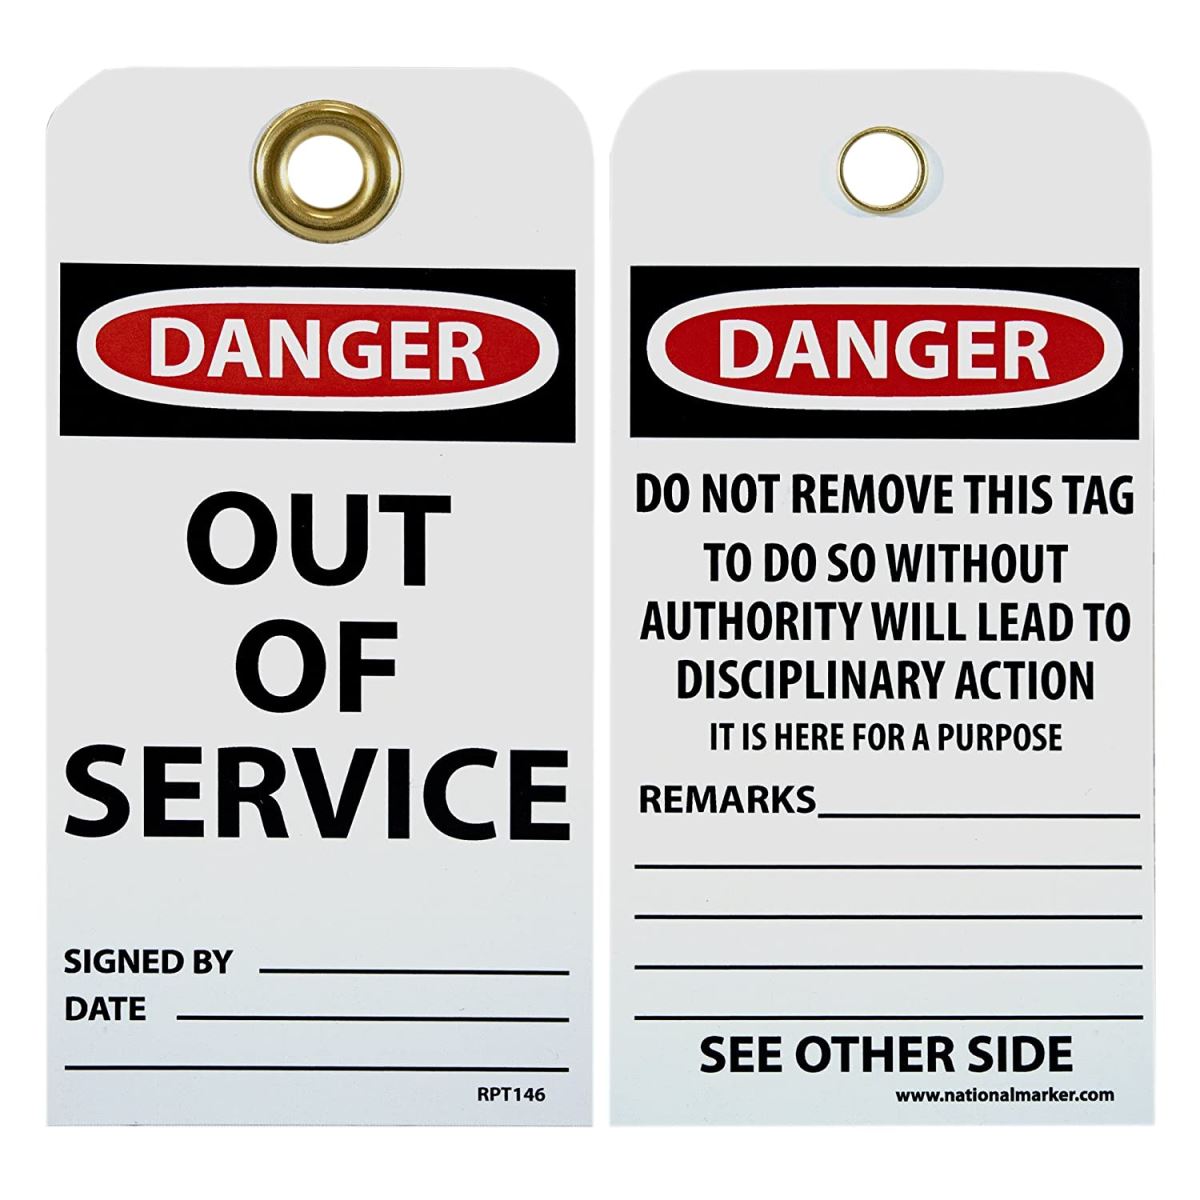 RPT146G "DANGER: OUT OF SERVICE" TAGS 25PK from National Marker Company